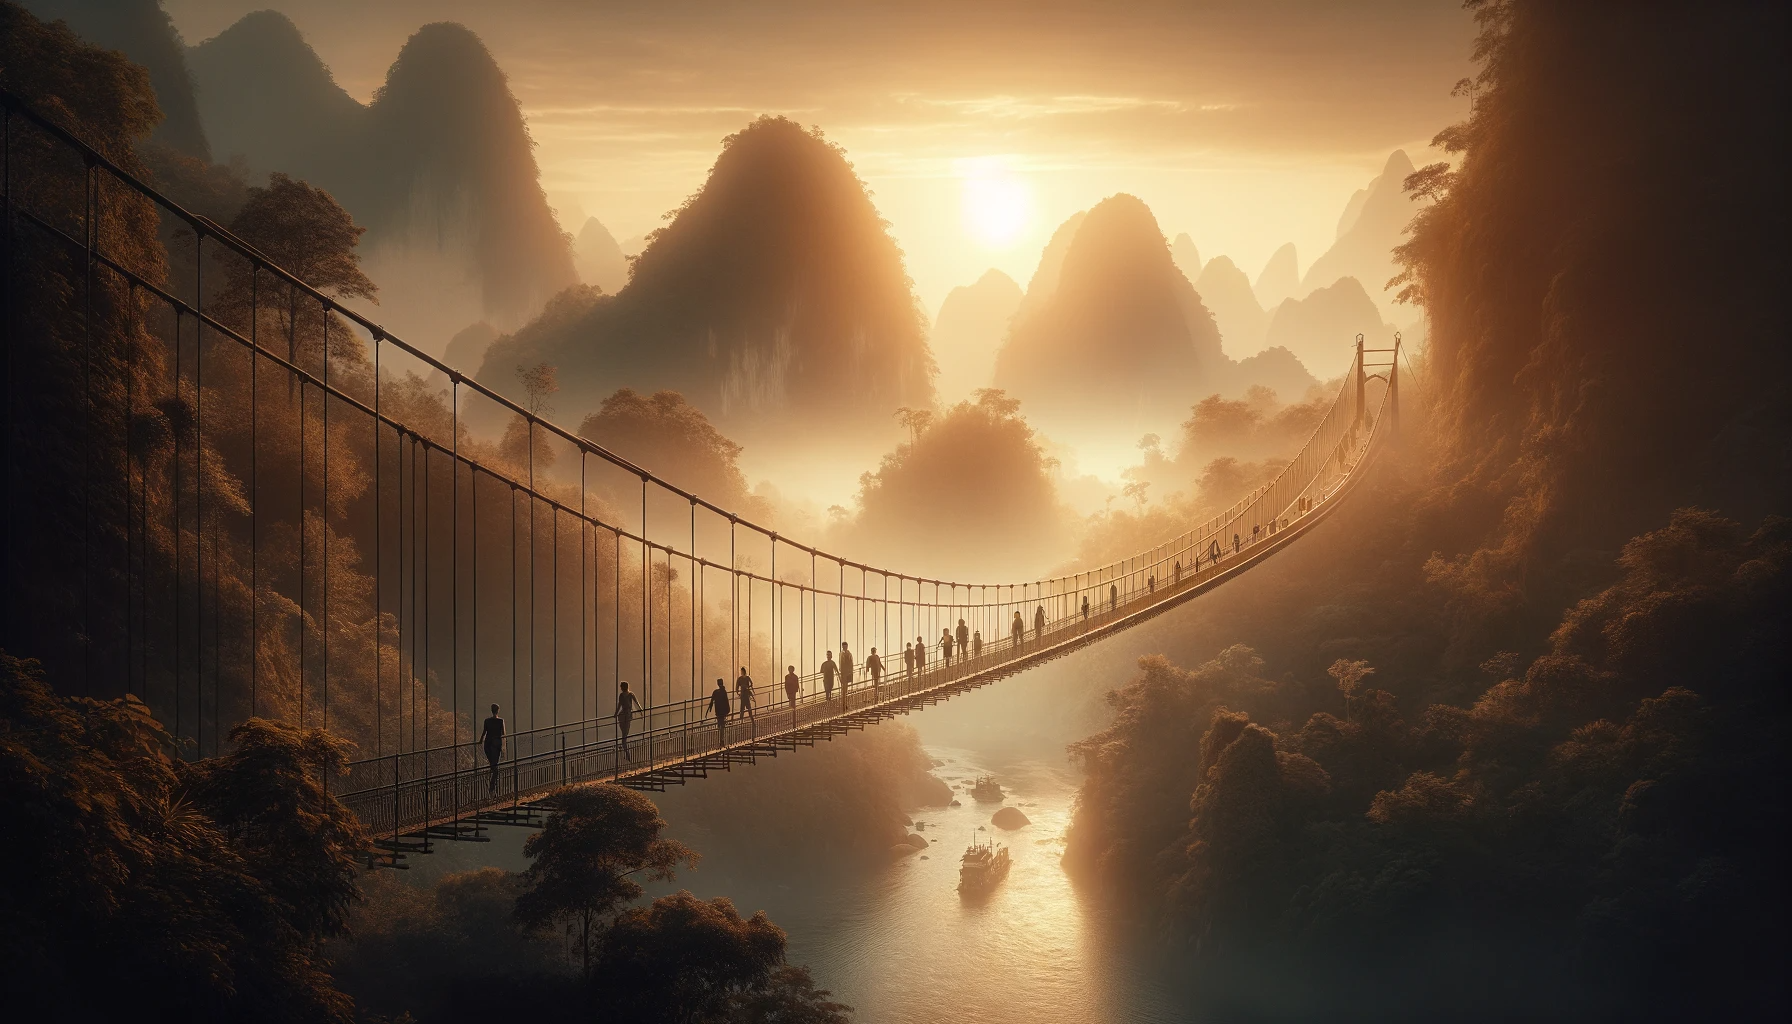 DALL·E 2023-12-19 12.15.10 - A fotorealistic image capturing the same essence and mood as the provided picture, which shows a suspended bridge in a mountainous area during sunset 